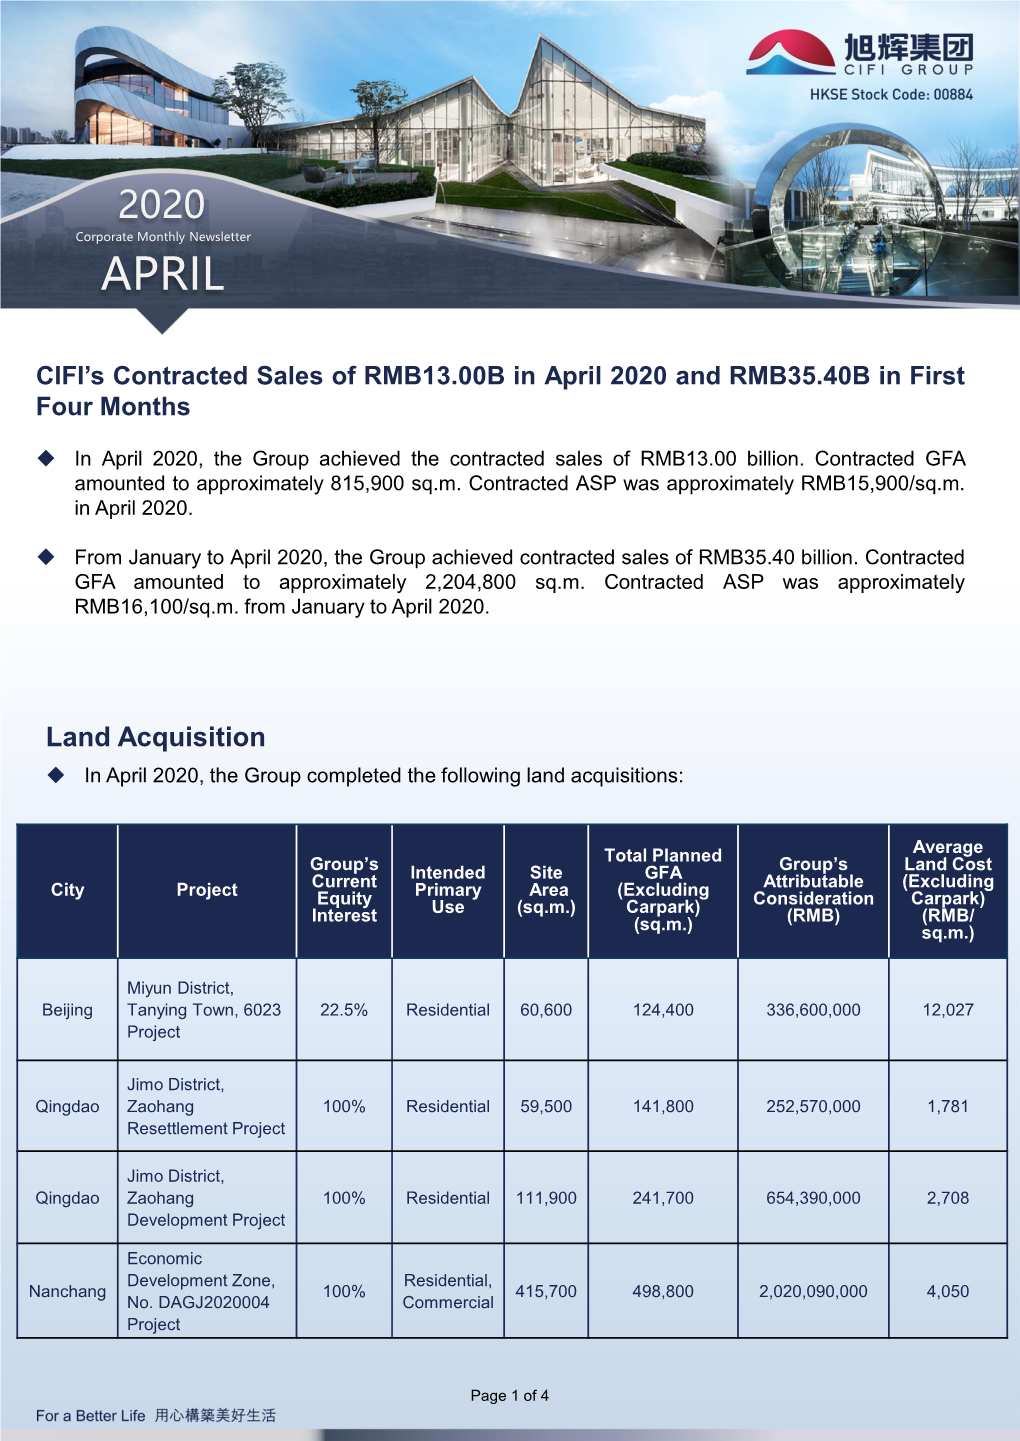 Land Acquisition ◆ in April 2020, the Group Completed the Following Land Acquisitions